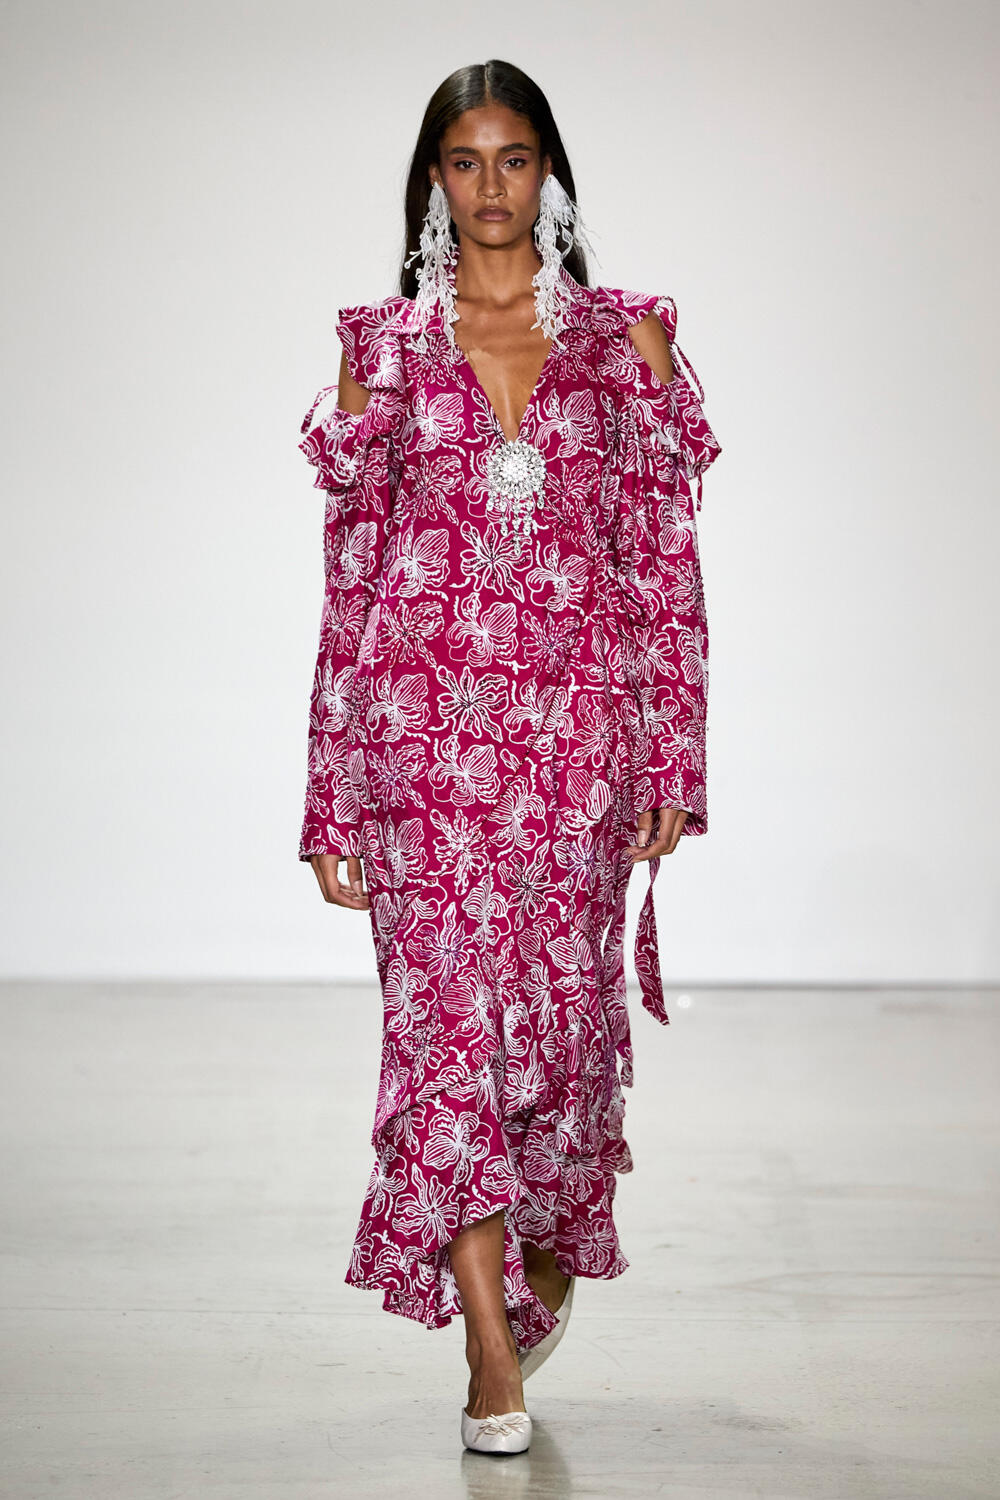 Suedeson By Kimberly Tandra Spring 2023 Fashion Show | The Impression